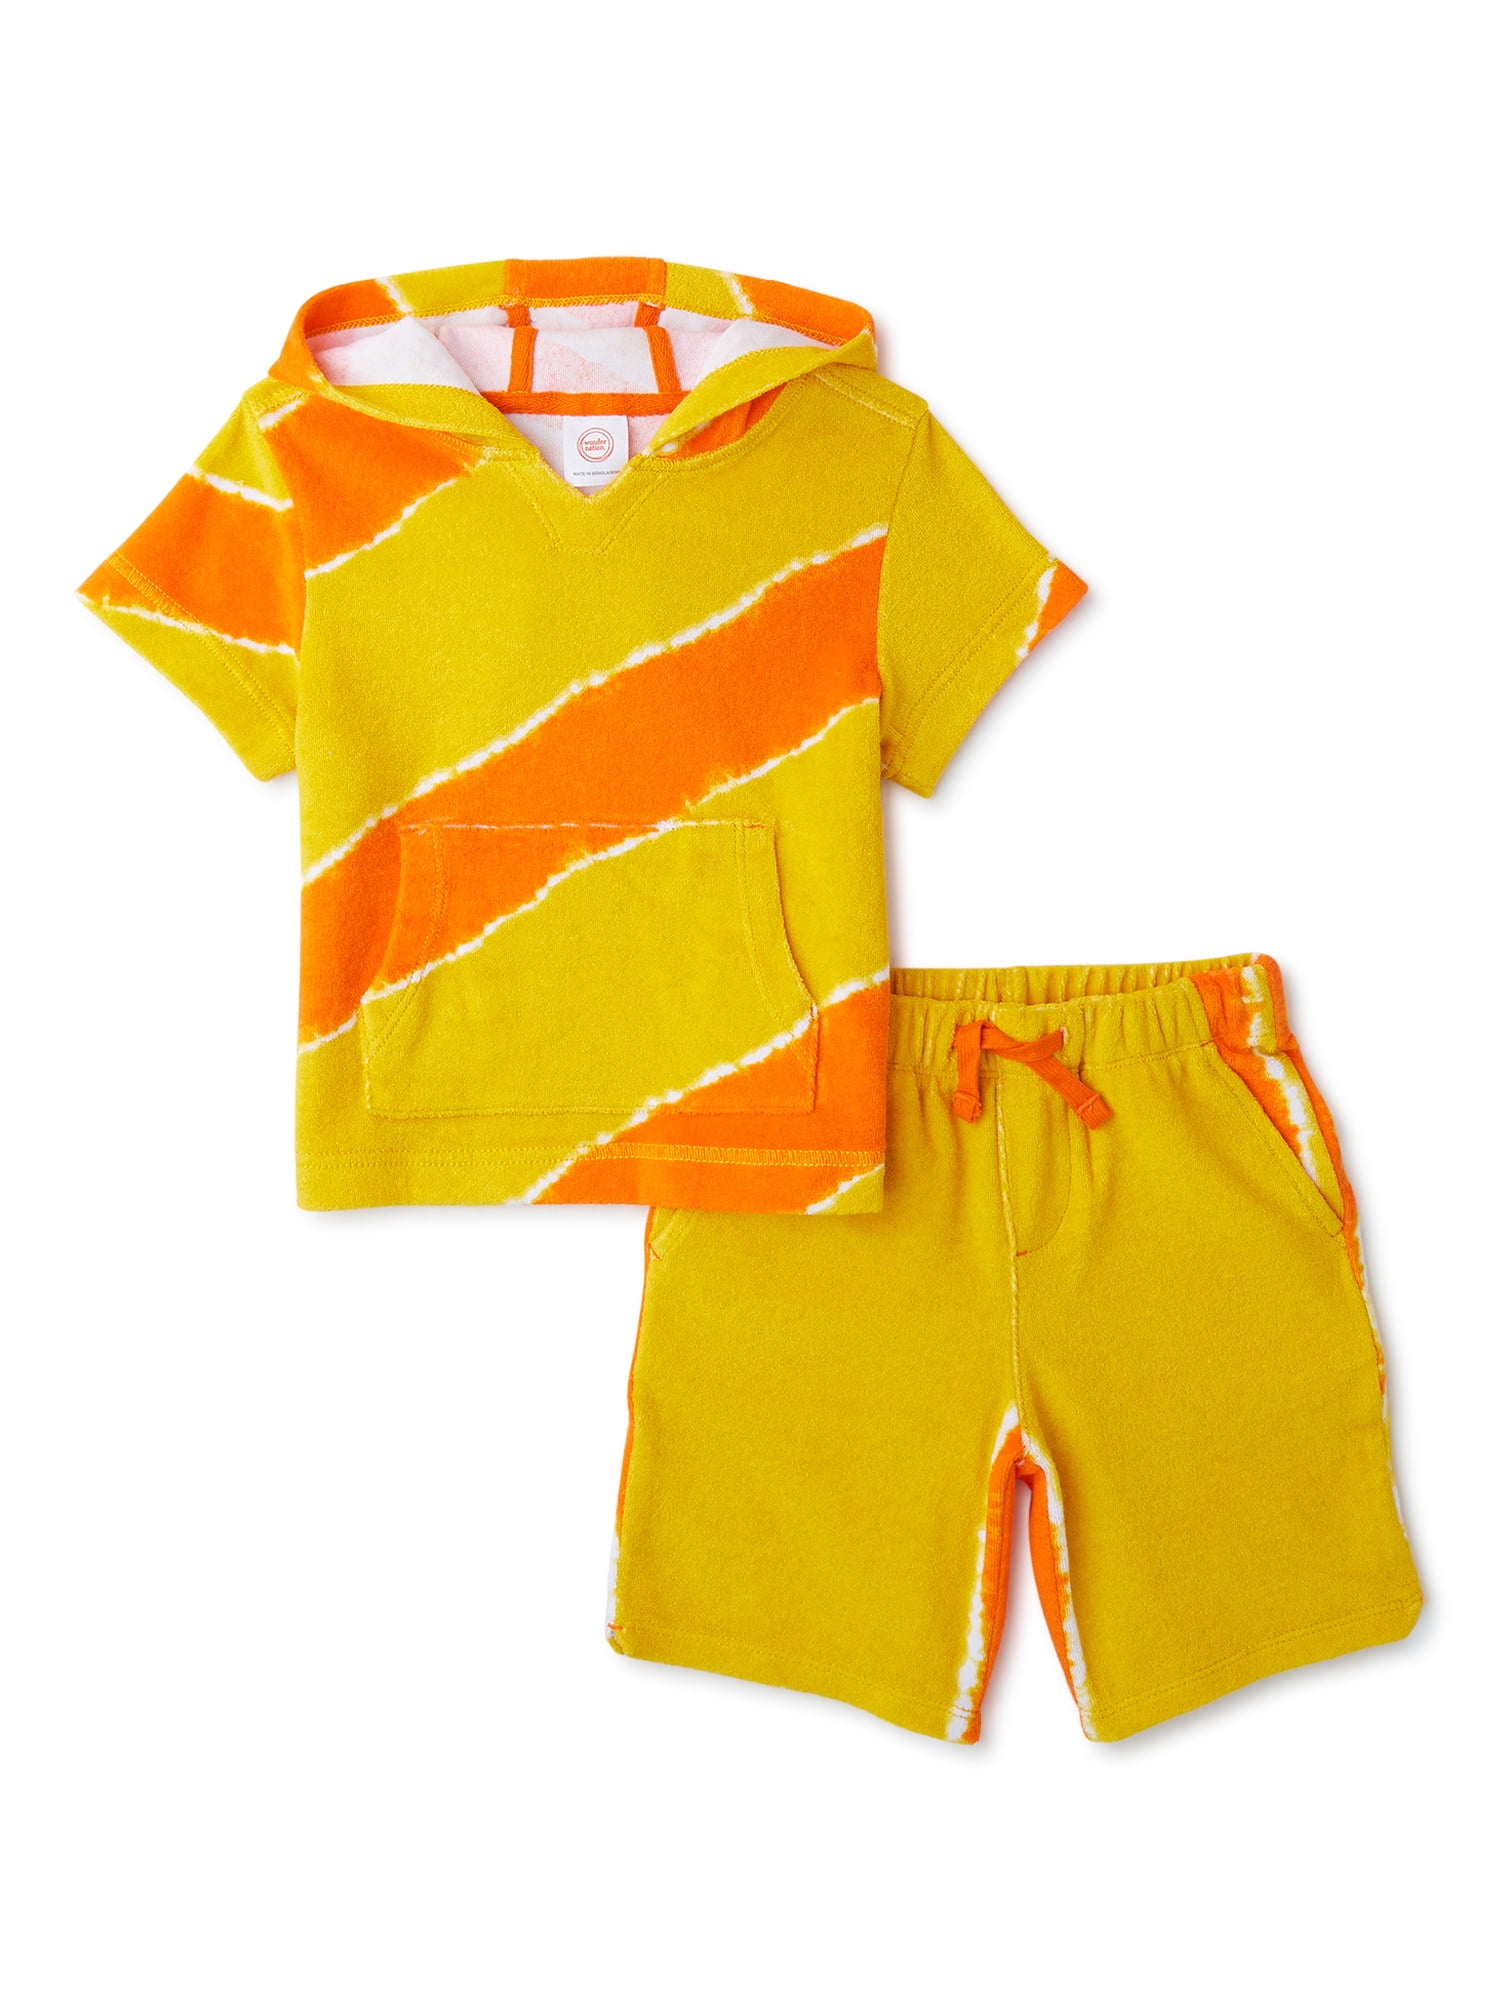 Outfit Terry Wonder Nation Towel and 2-Piece, Baby Set, Toddler 12M-5T Boys\'